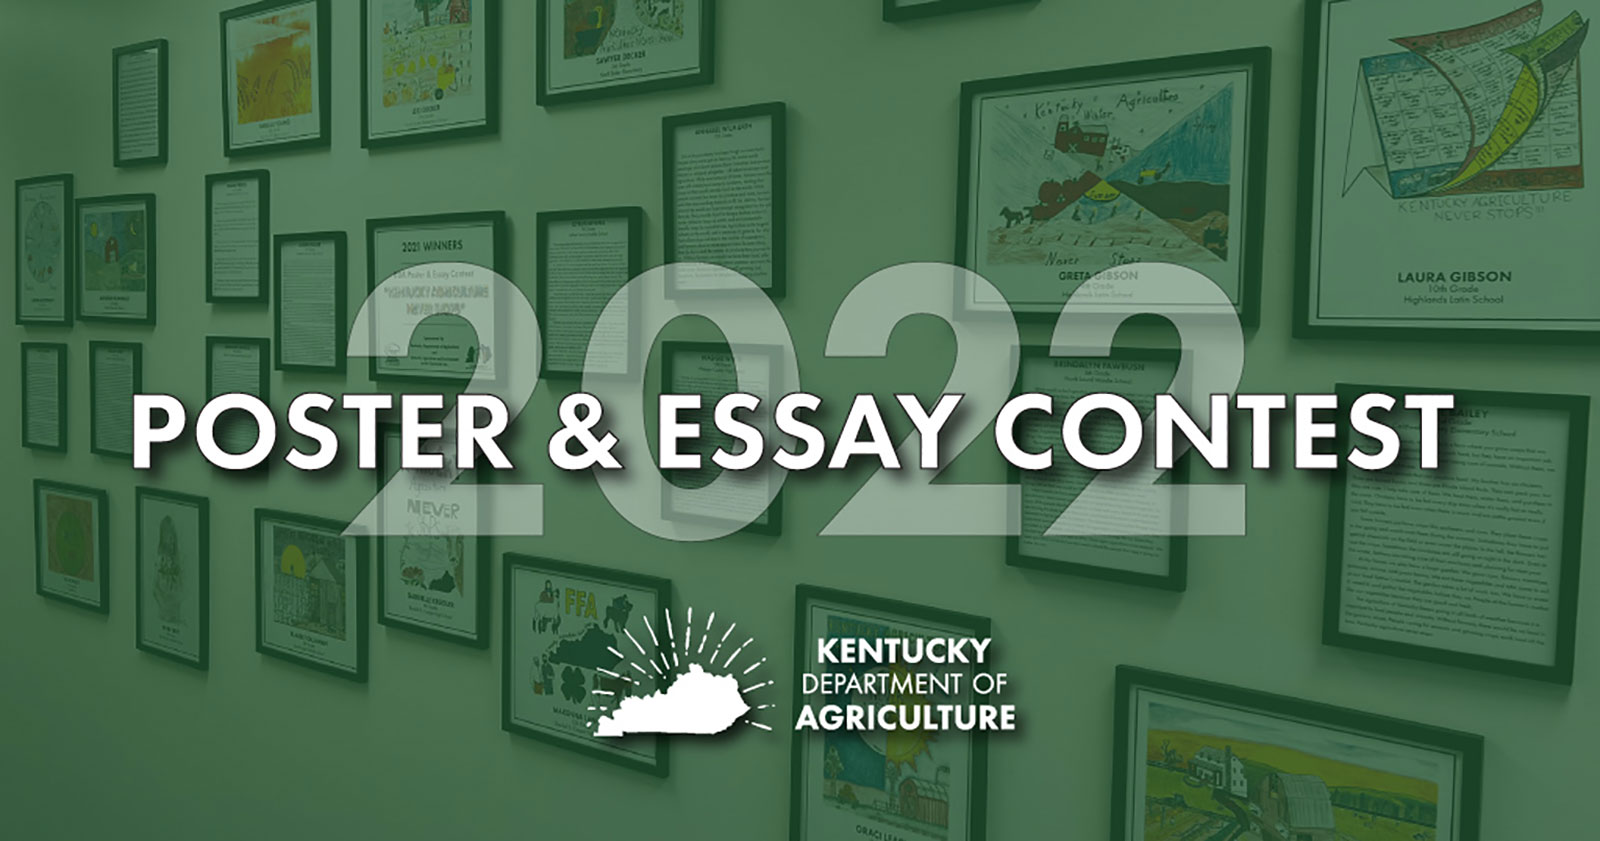 Poster and essay contest